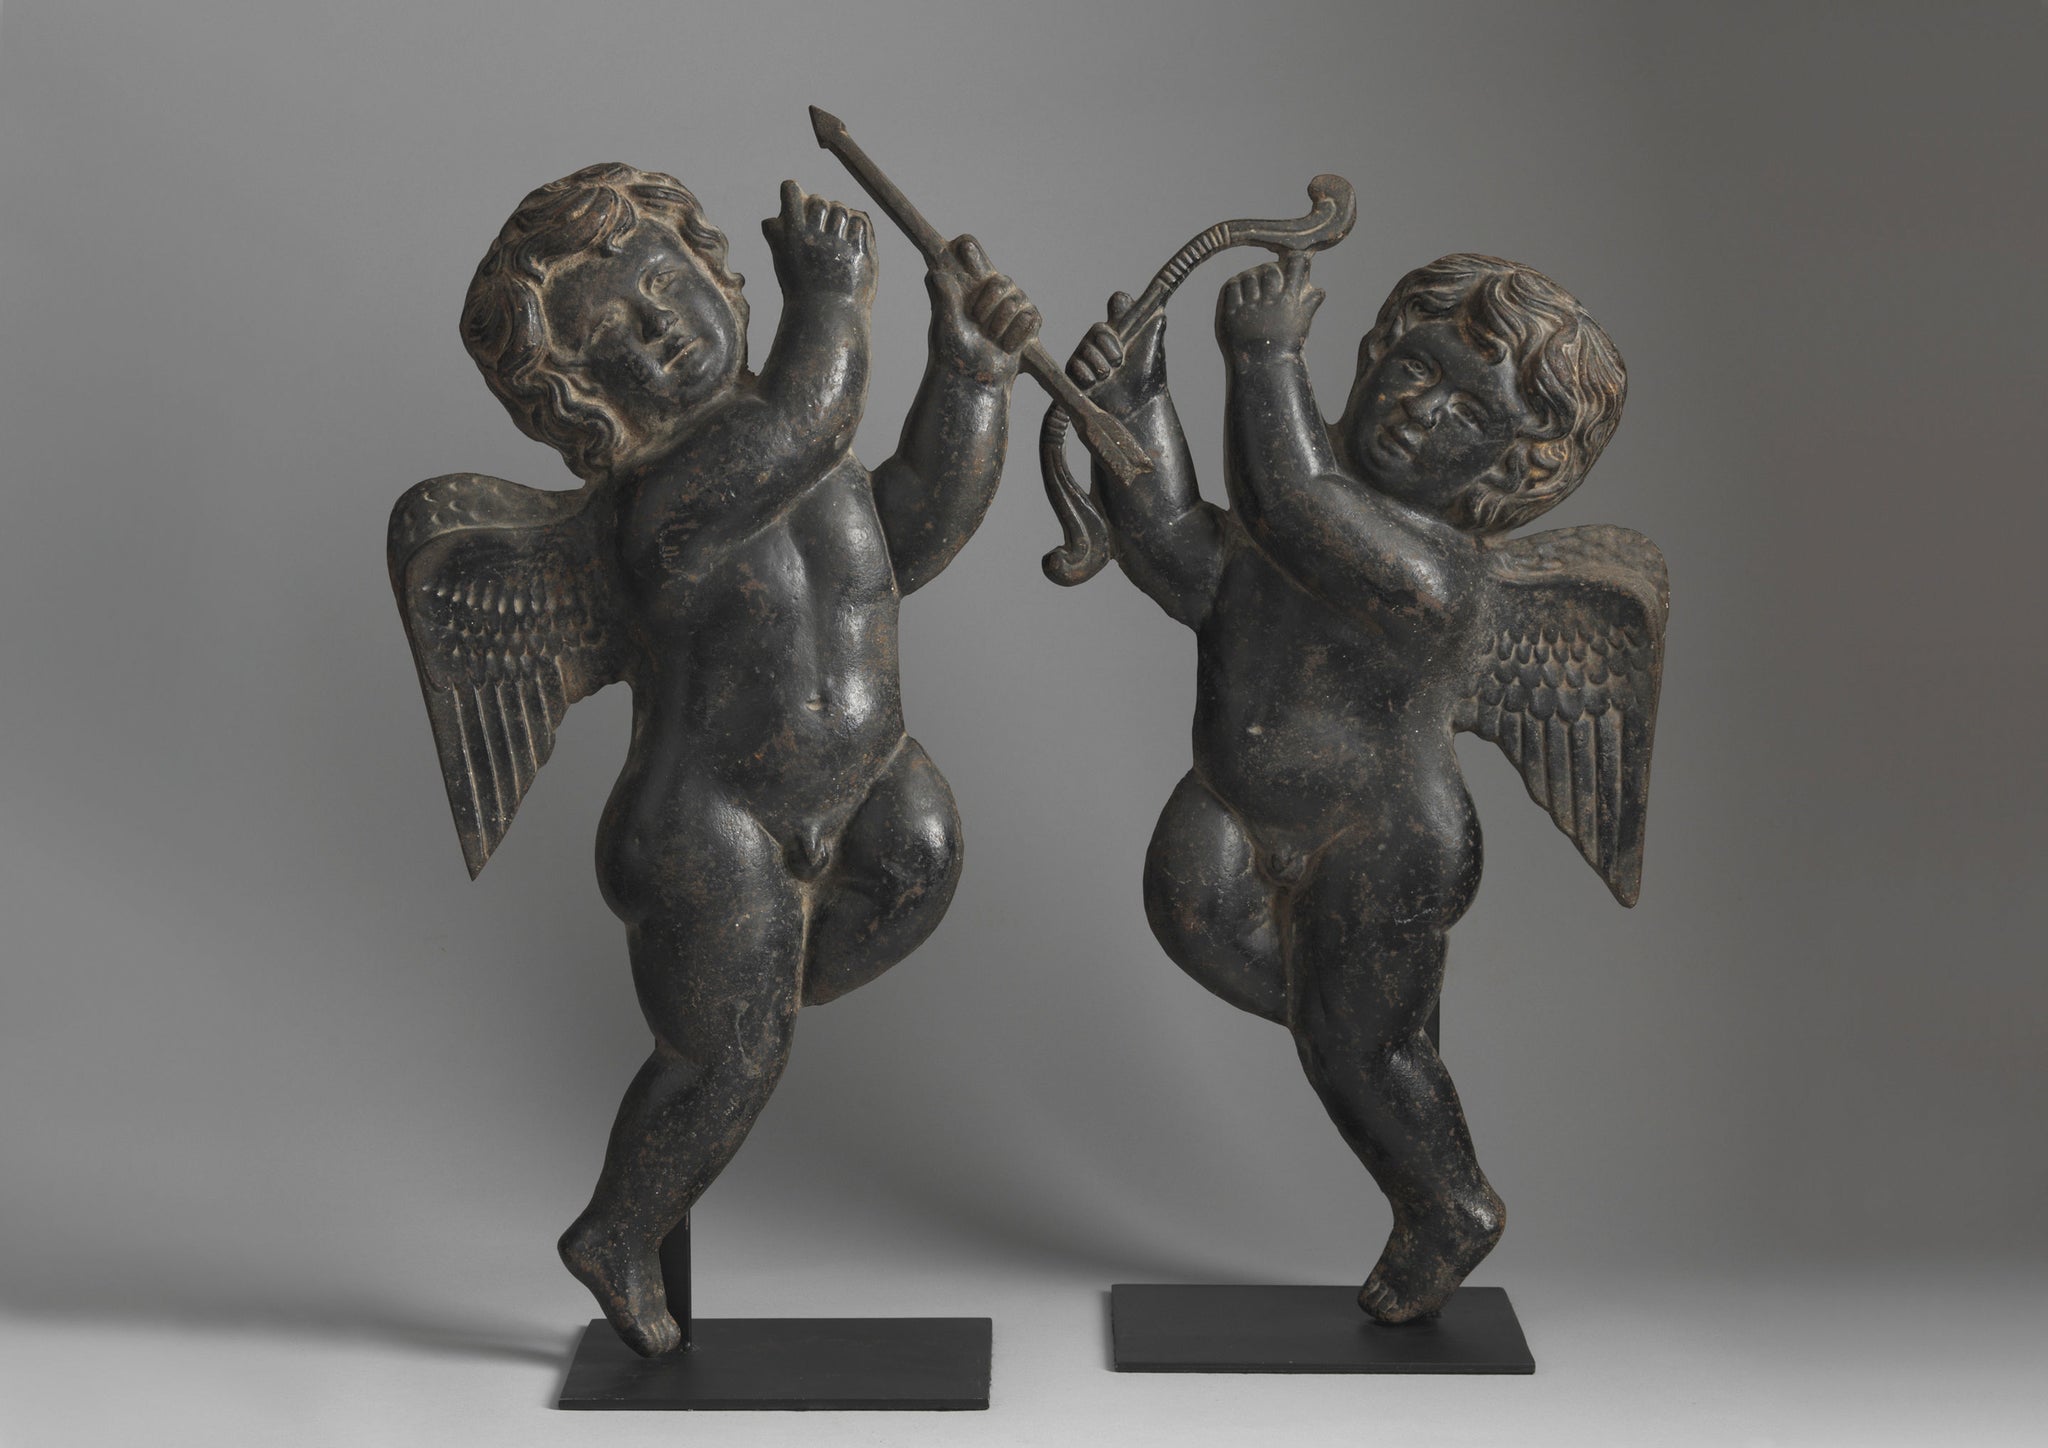 An Engaging Pair or Cherubic Winged Angels